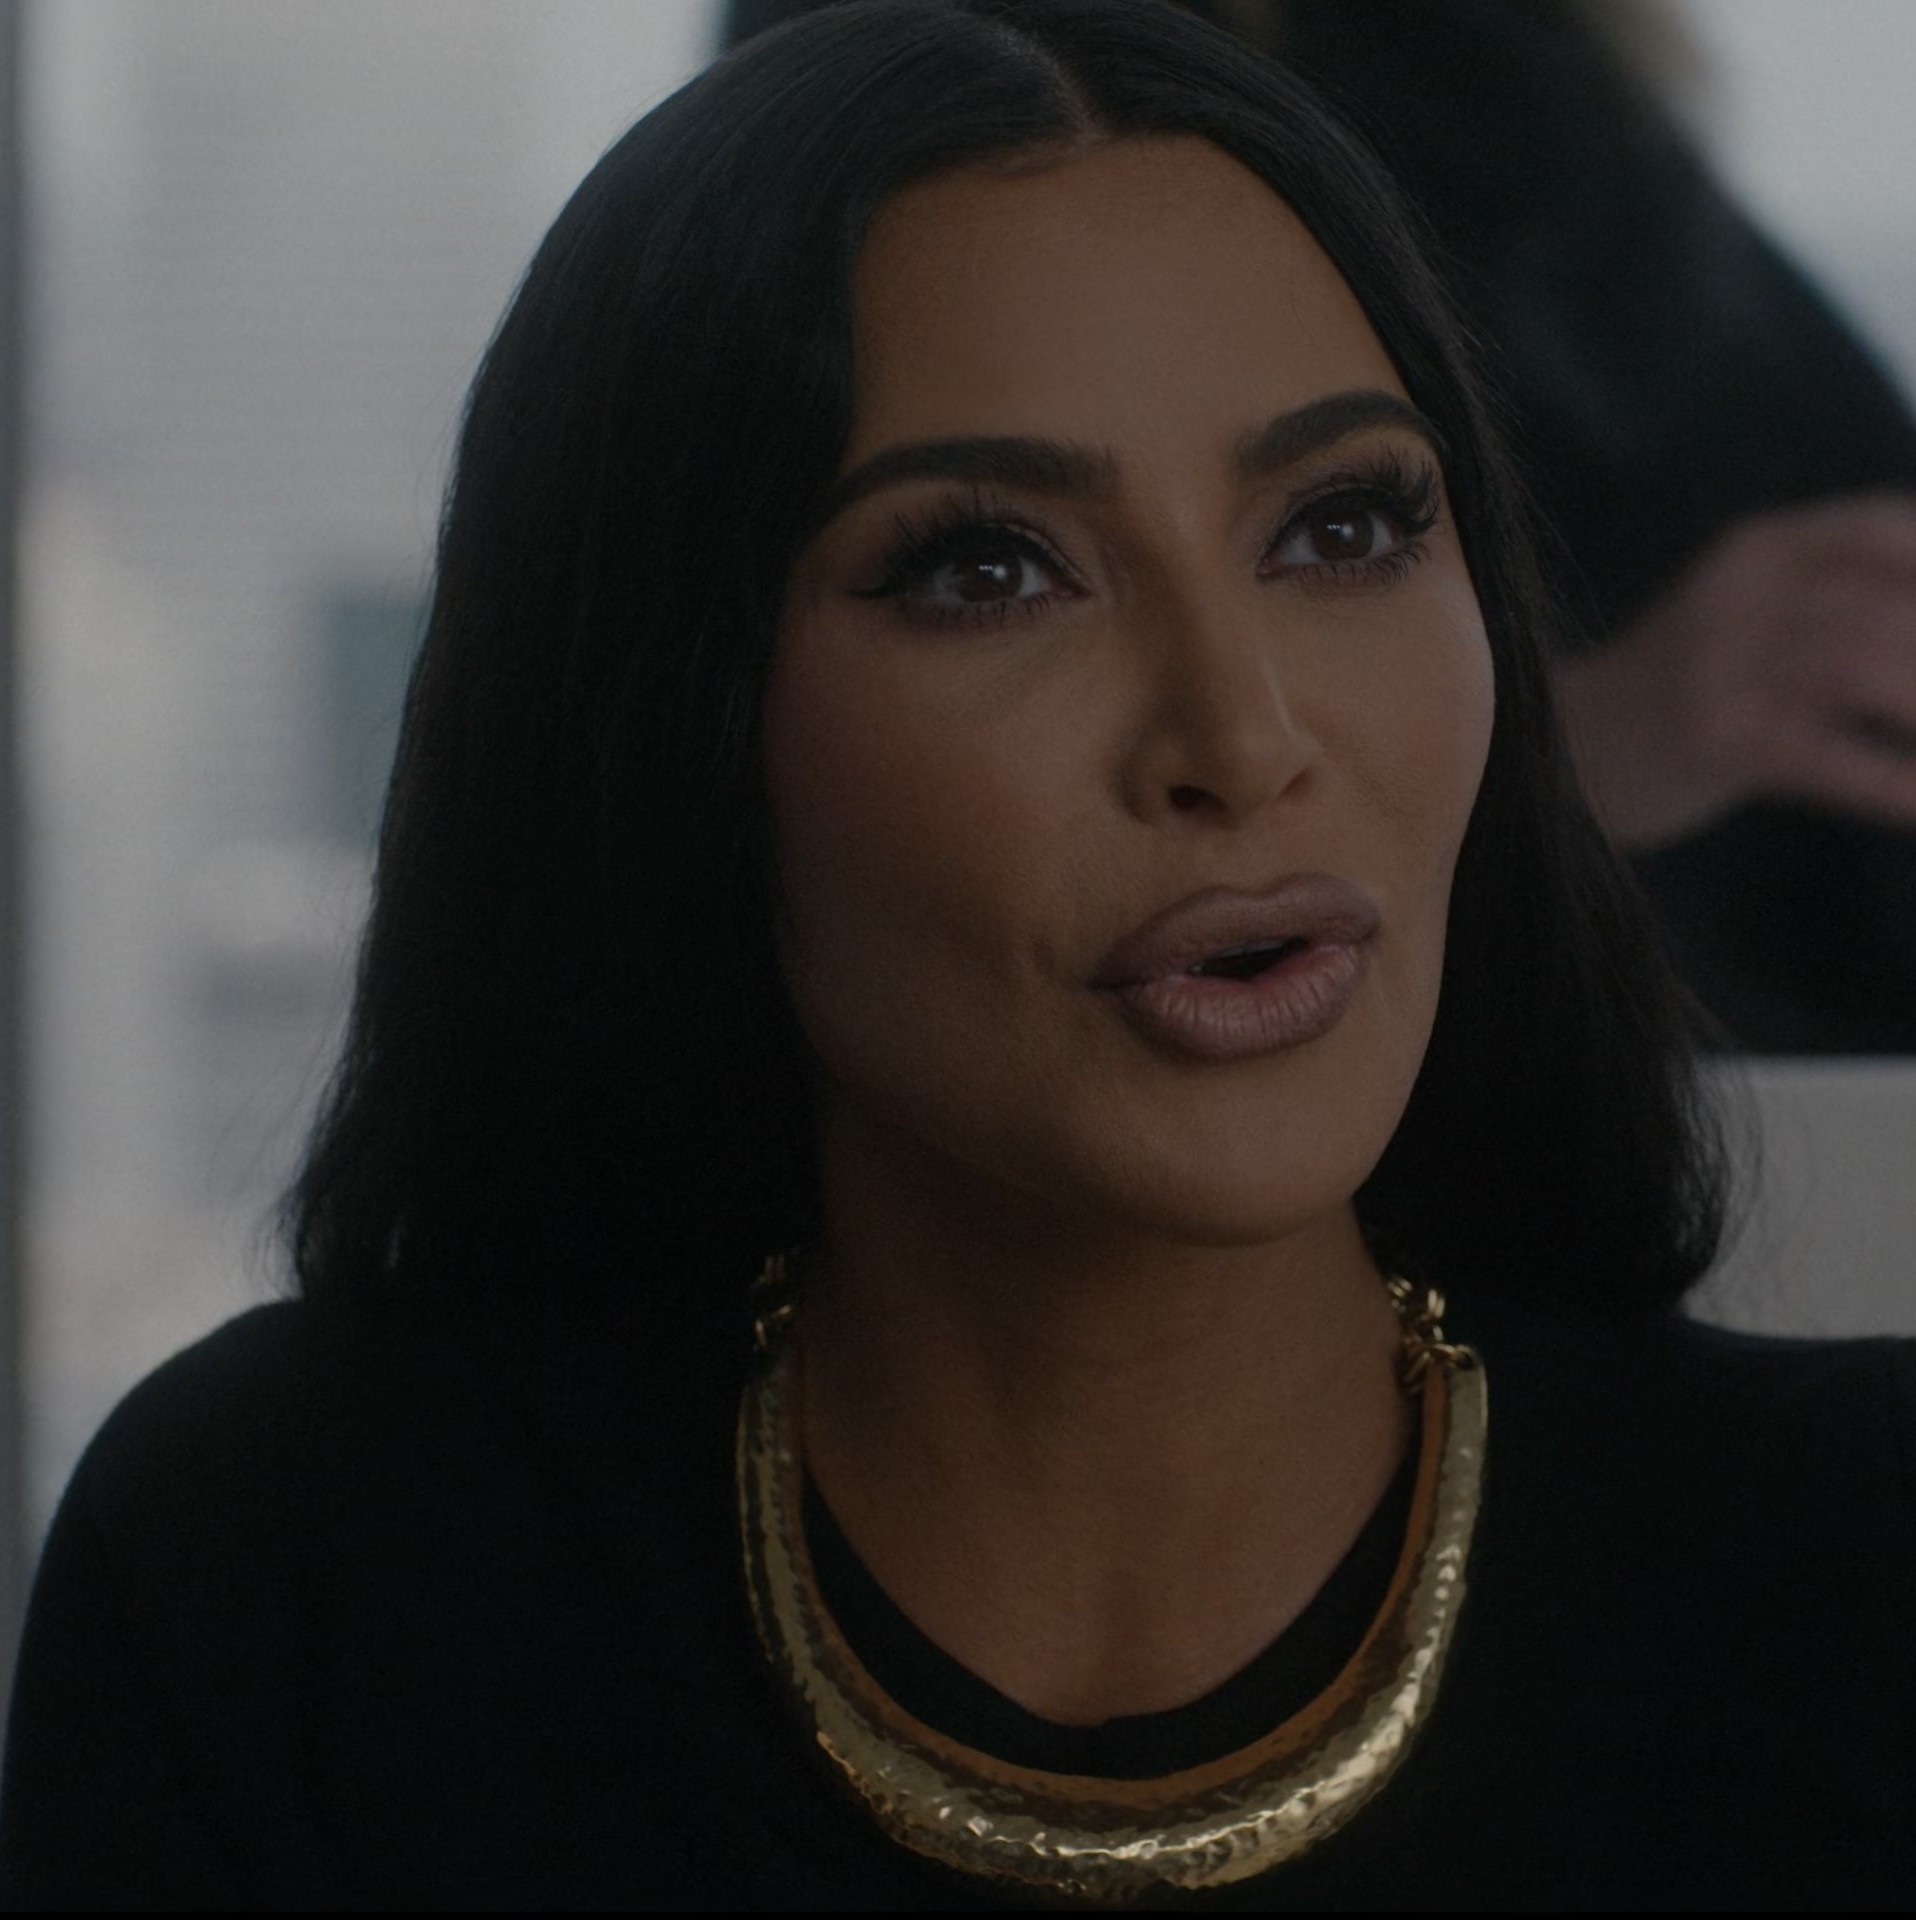 Worn on American Horror Story TV Show - Bold Gold-Tone Textured Statement Necklace Worn by Kim Kardashian as Siobhan Walsh